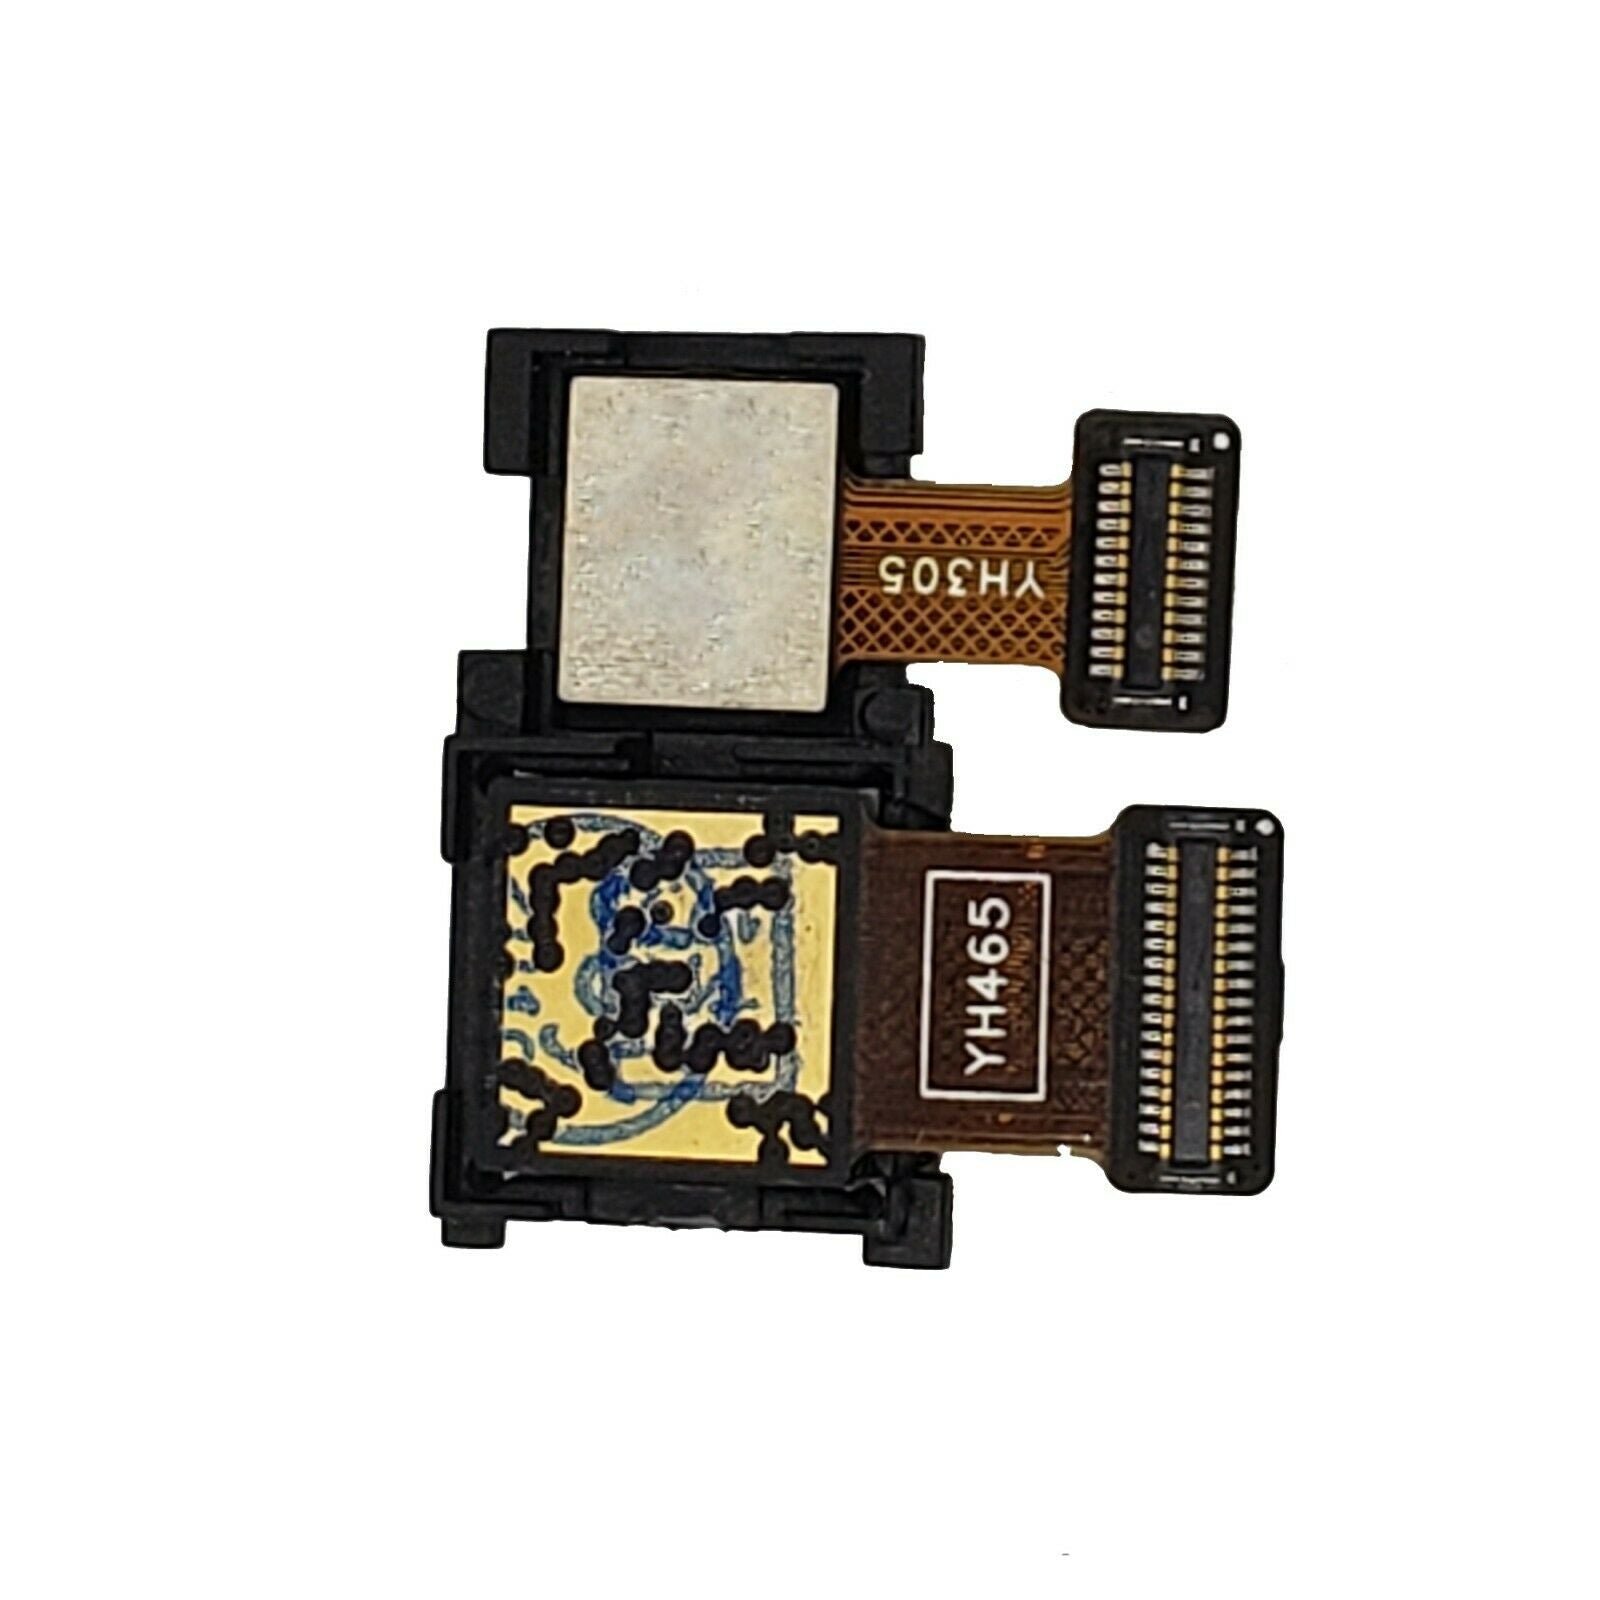 Huawei P20 Lite Genuine Rear Main Camera Module for [product_price] - First Help Tech